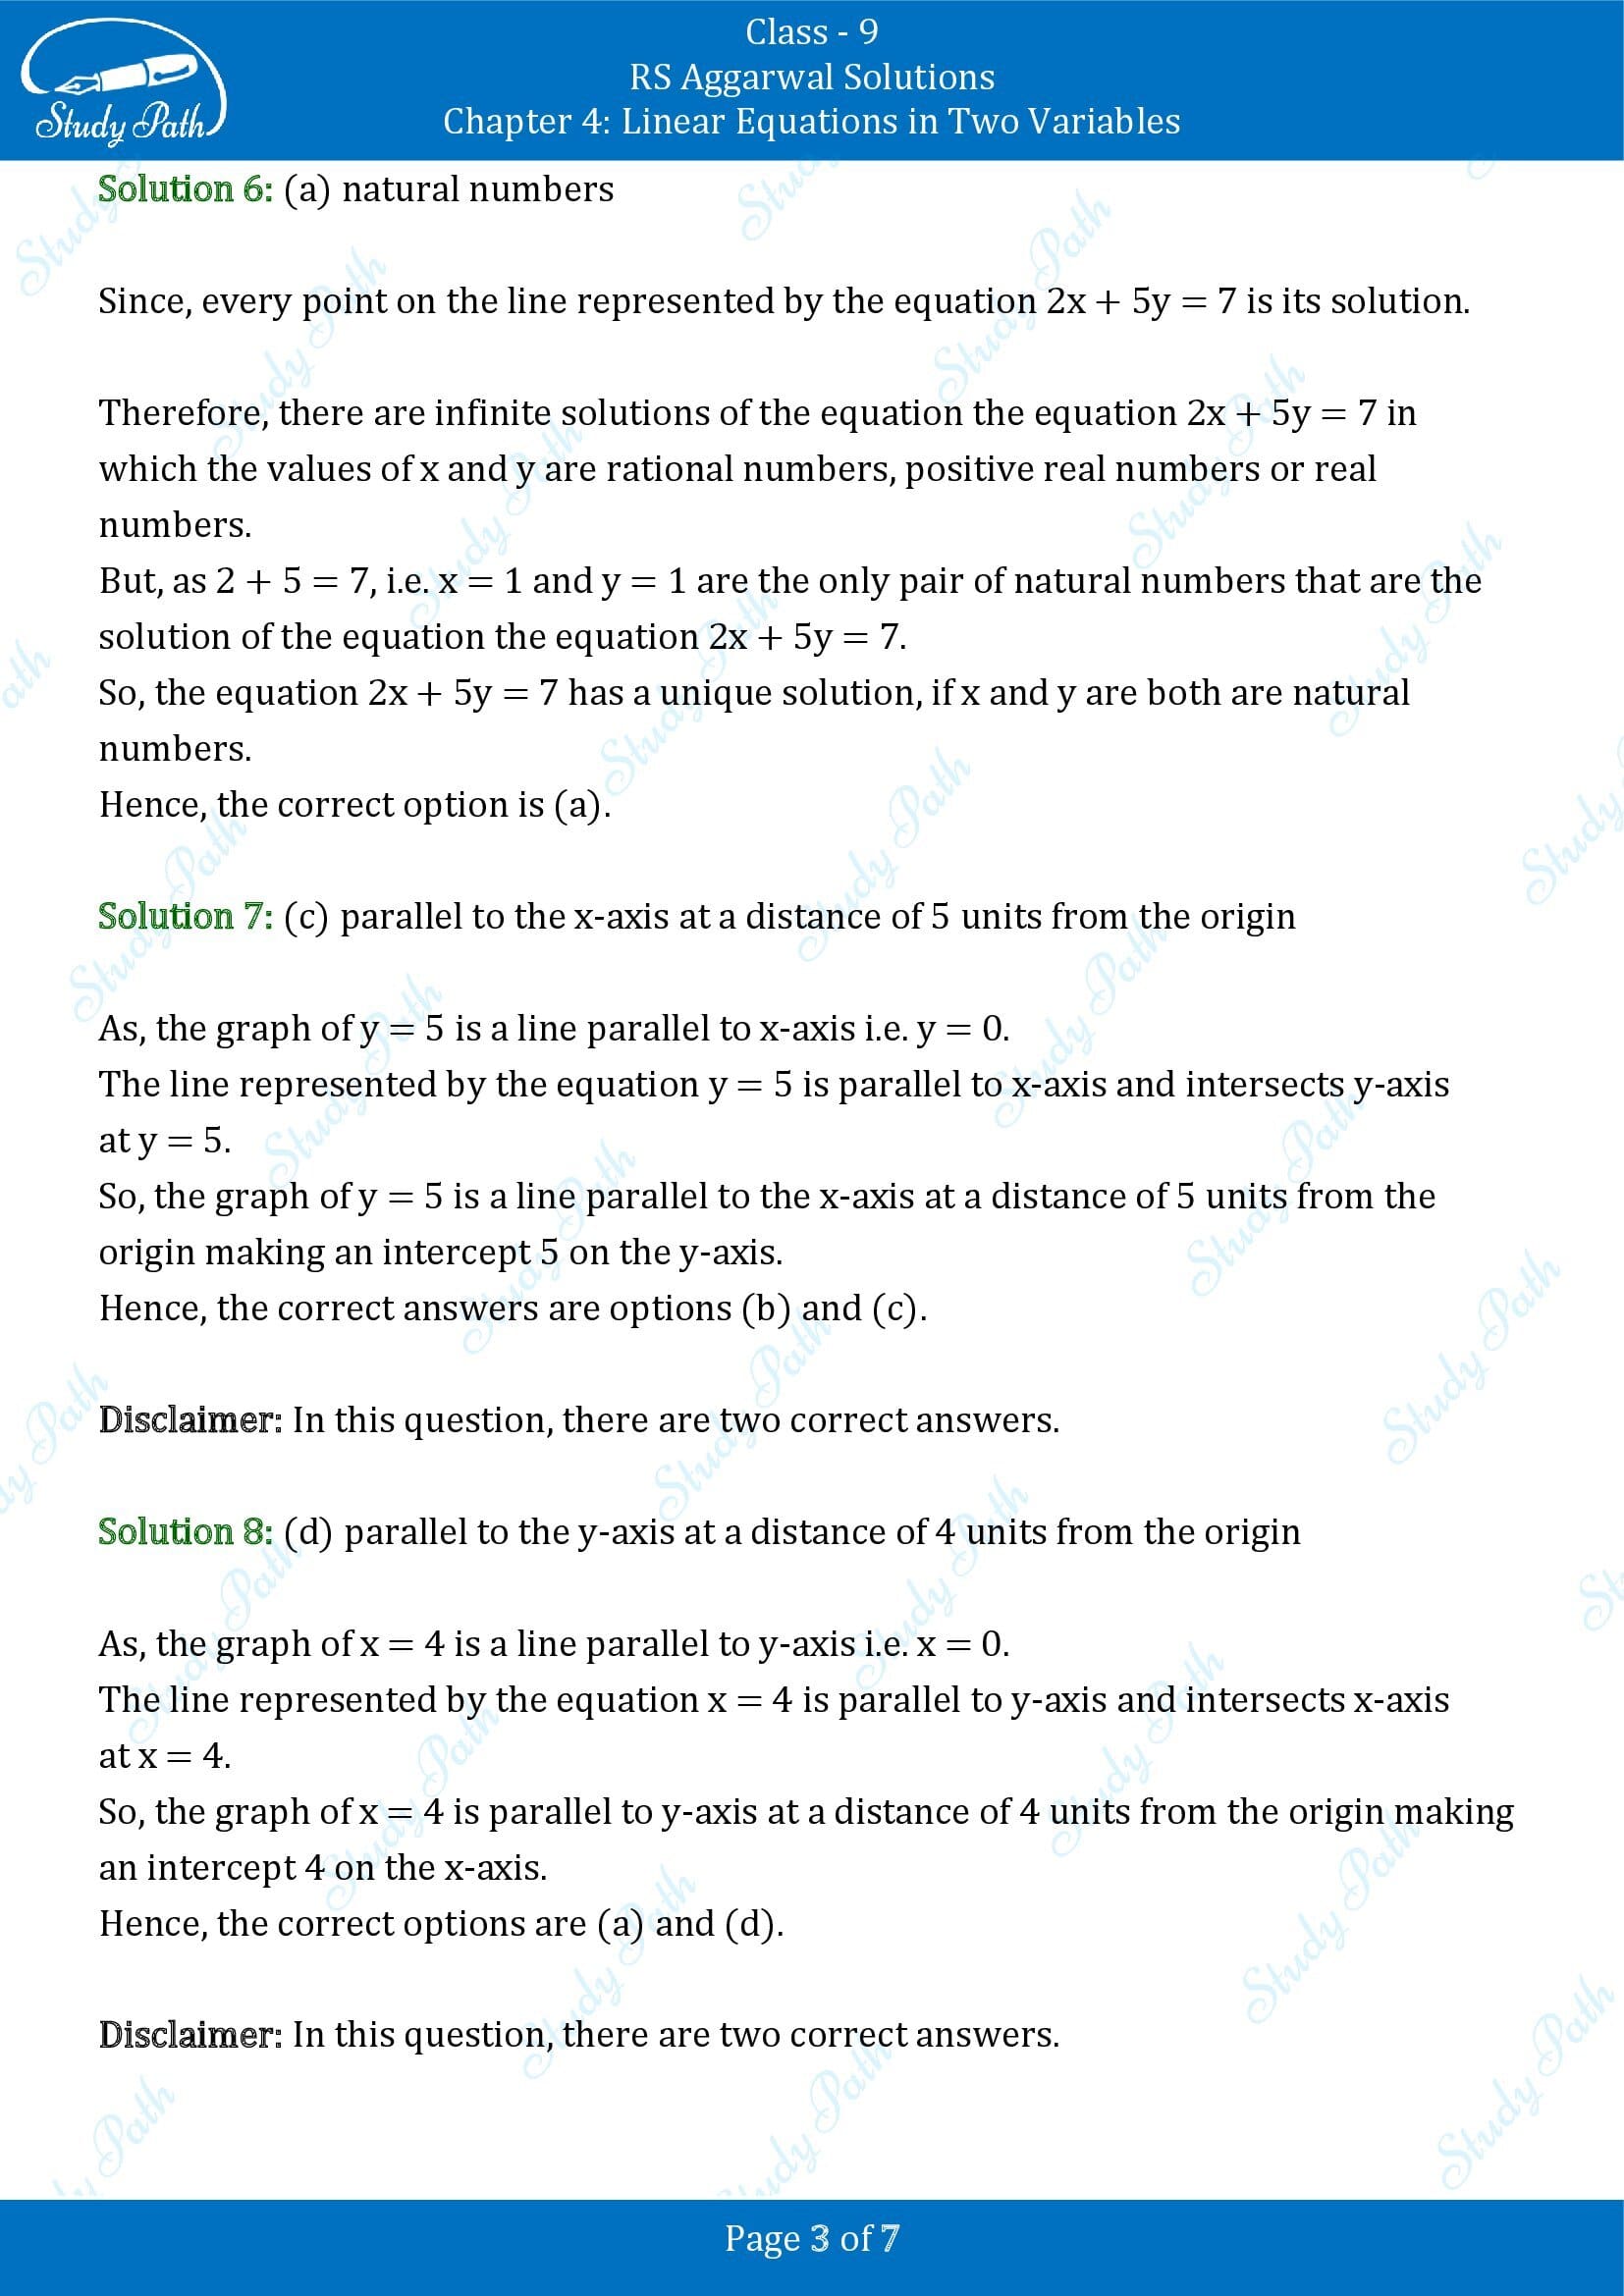 RS Aggarwal Solutions Class 9 Chapter 4 Linear Equations in Two Variables Multiple Choice Questions MCQs 00003